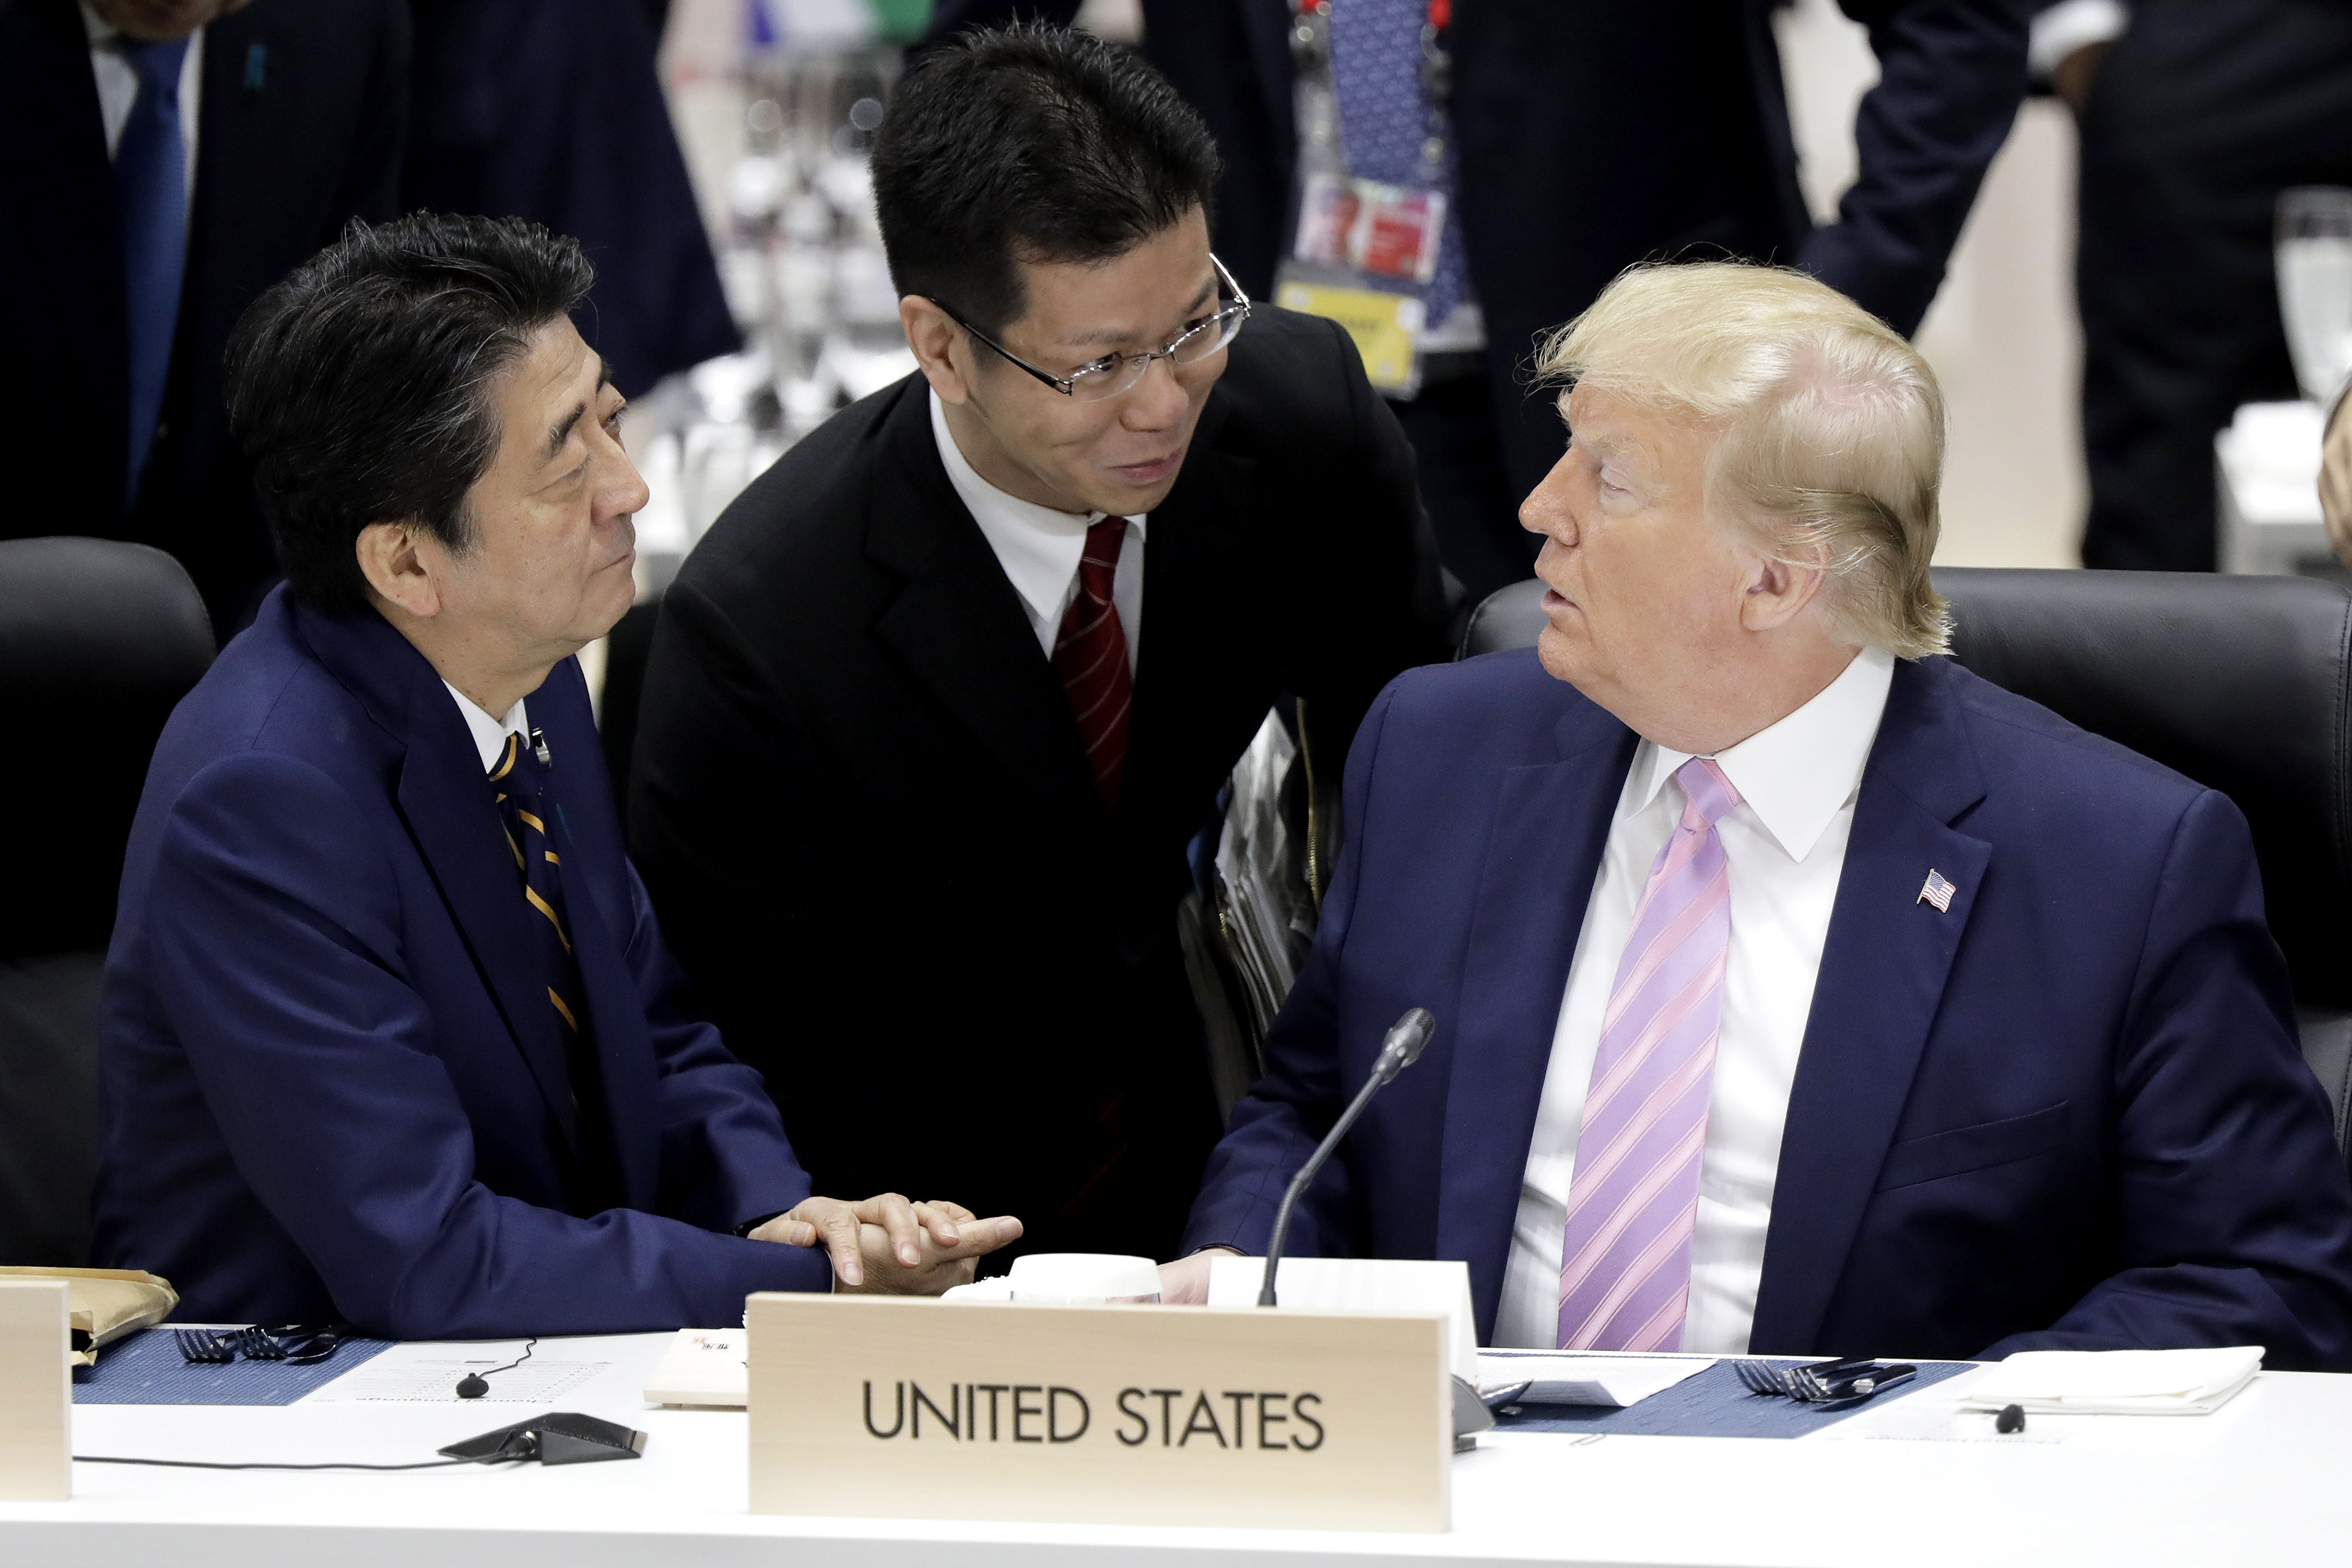 President Donald Trump is waging both a trade war and an emergency currency war. It will be hard for him to win both. He has complained that the value of the Euro and the Yen are too high compared to the dollar. He is seen at the G20 Summit in June 2019 with Japanese Prime Minister Shinzo Abe (left). (Kiyoshi Ota - Pool/Getty Images)